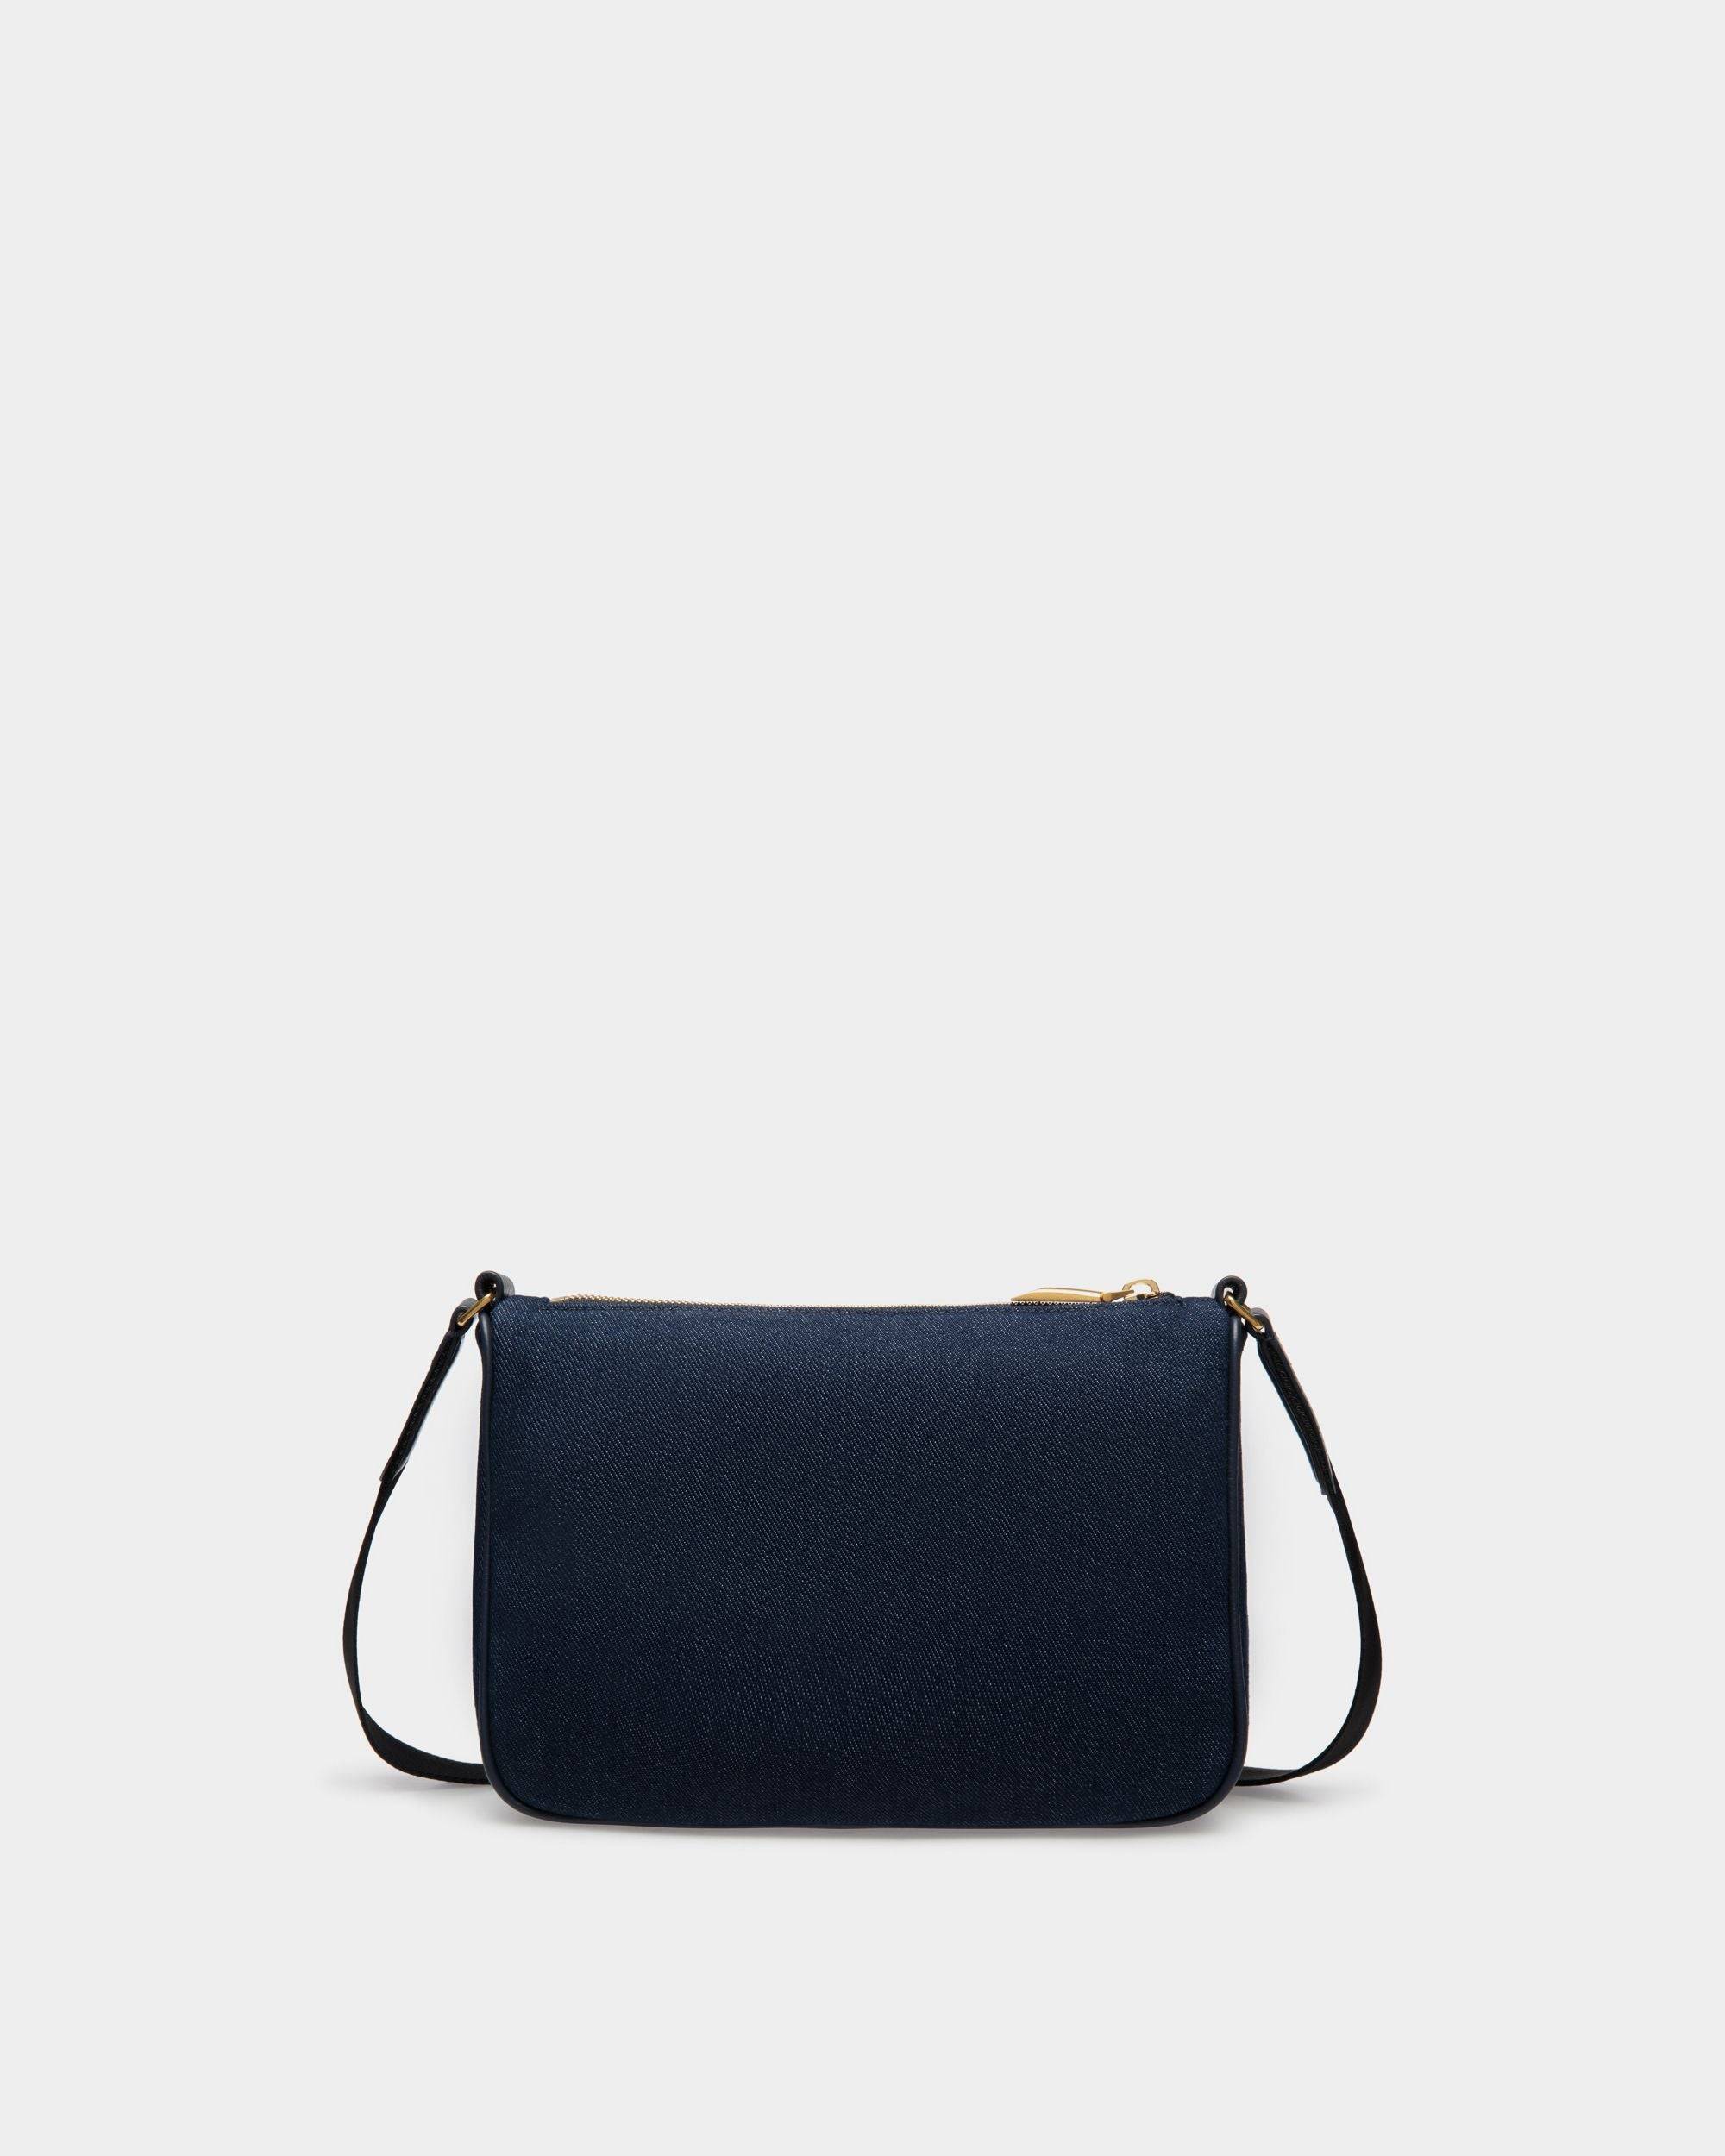 Bar | Men's Crossbody Bag in Blue Canvas And Leather | Bally | Still Life Back